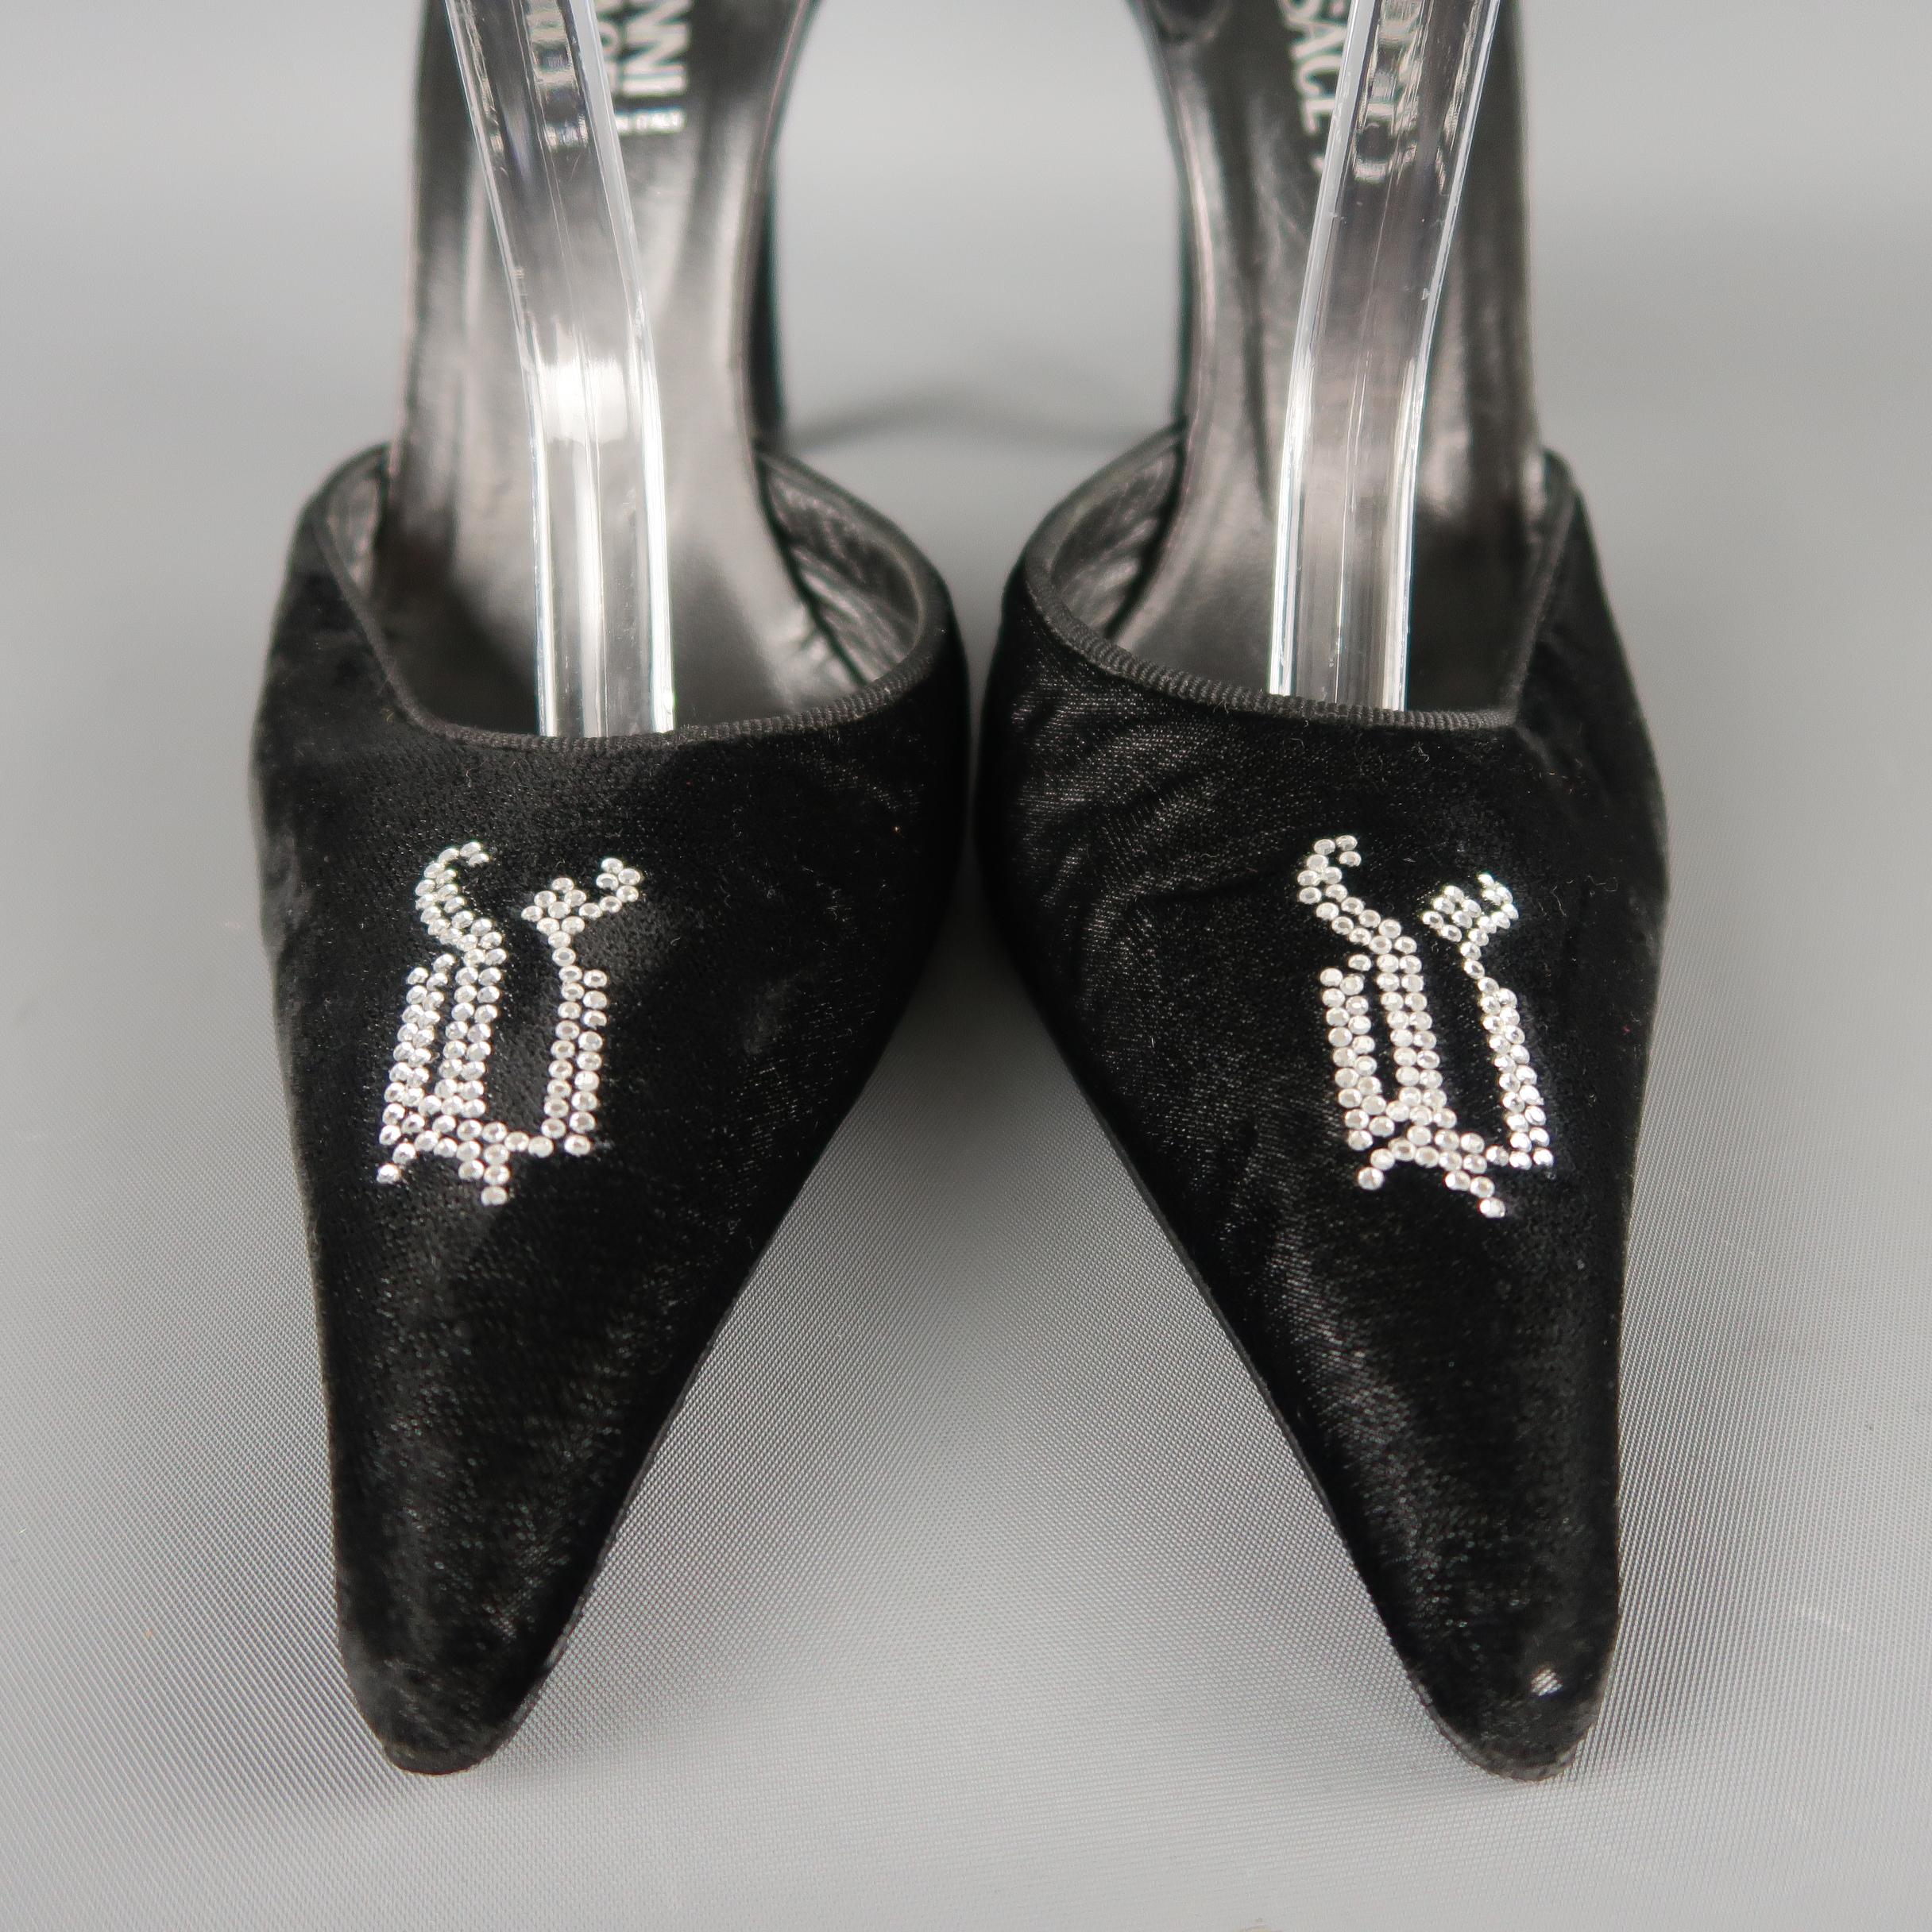 GIANNI VERSACE pumps come in black velvet with a pointed mule style toe with crystal Old English V, covered heel, and double leather ankle tie straps. Made in Italy.
 
Good Pre-Owned Condition.
Marked: IT 37
 
Heel:4 in.